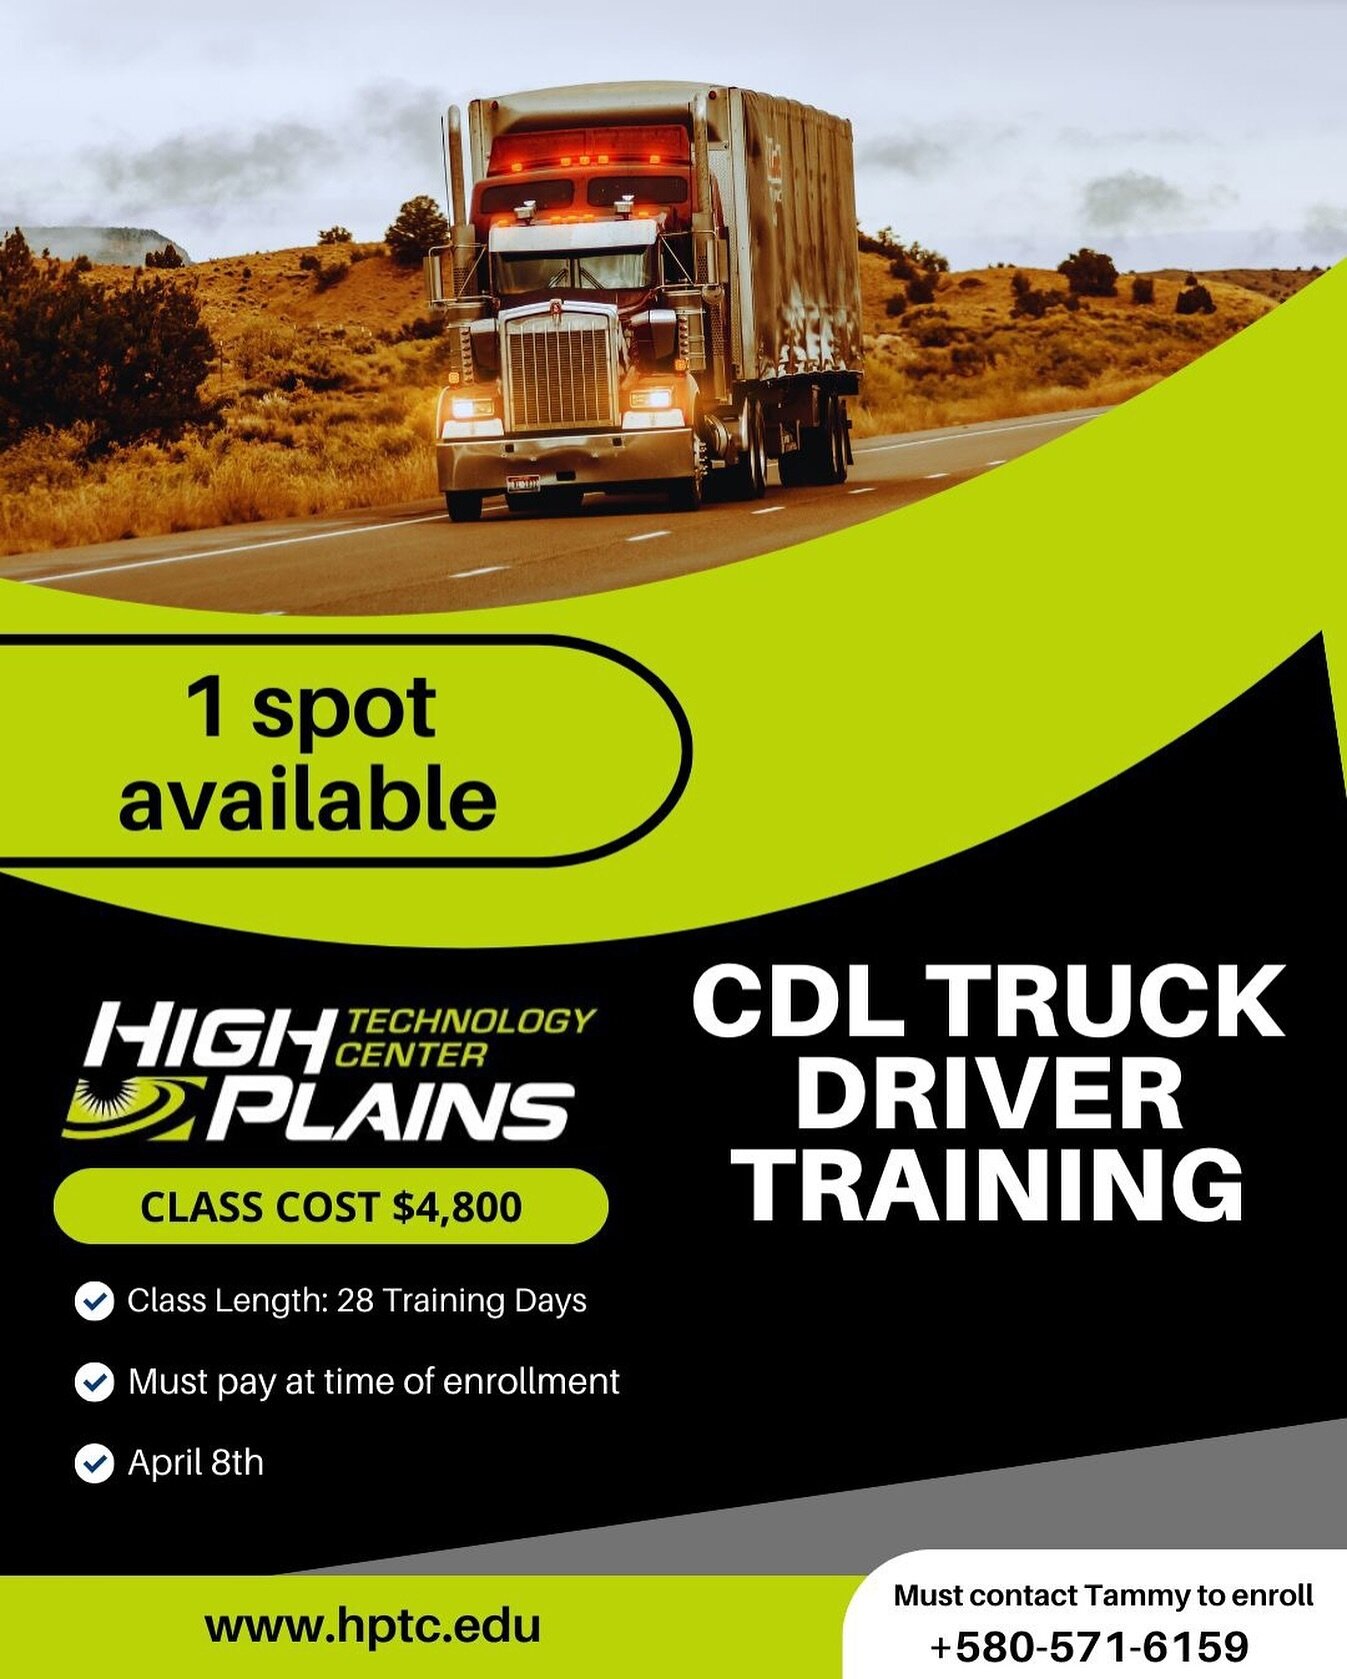 We have once again had one spot become available for the April 8th CDL Training! Contact Tammy to grab the spot at 580.571.6159 or tkelln@hptc.edu.